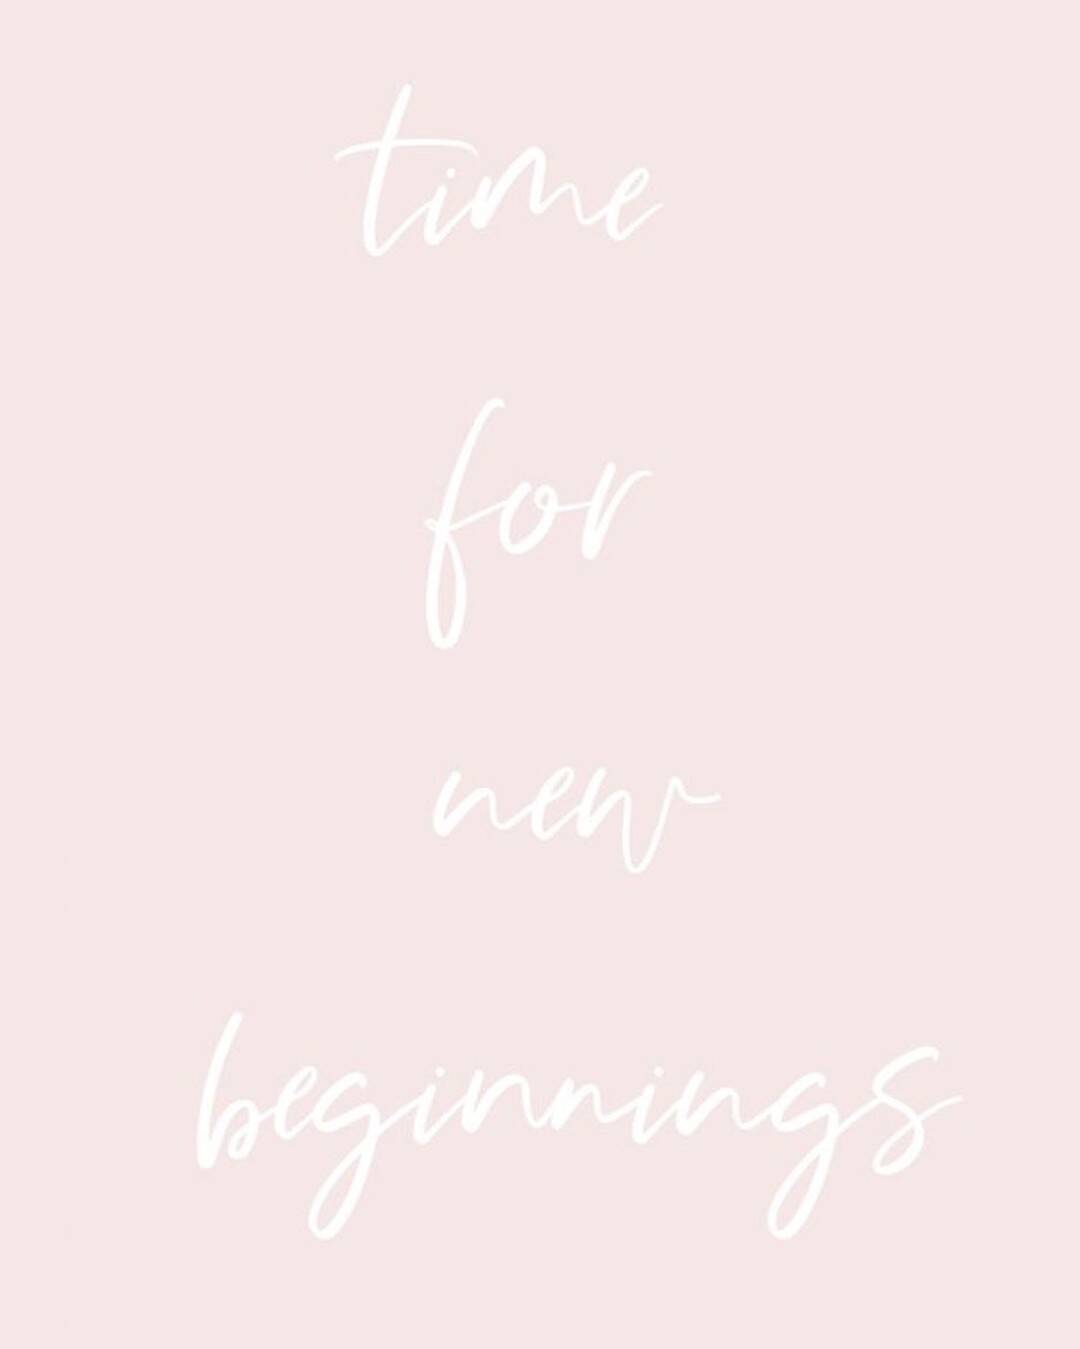 Never too late to start something new or have bigger goals💗
.
.
#newbeginnings #newyear #quote #quotestoliveby #goals #quotesaboutlife #quoteoftheday #pinkquotes #quotesdaily #pinterestinspired #pinterestquotes #michiganblogger #detroitblogger #motivationalquotesoftheday